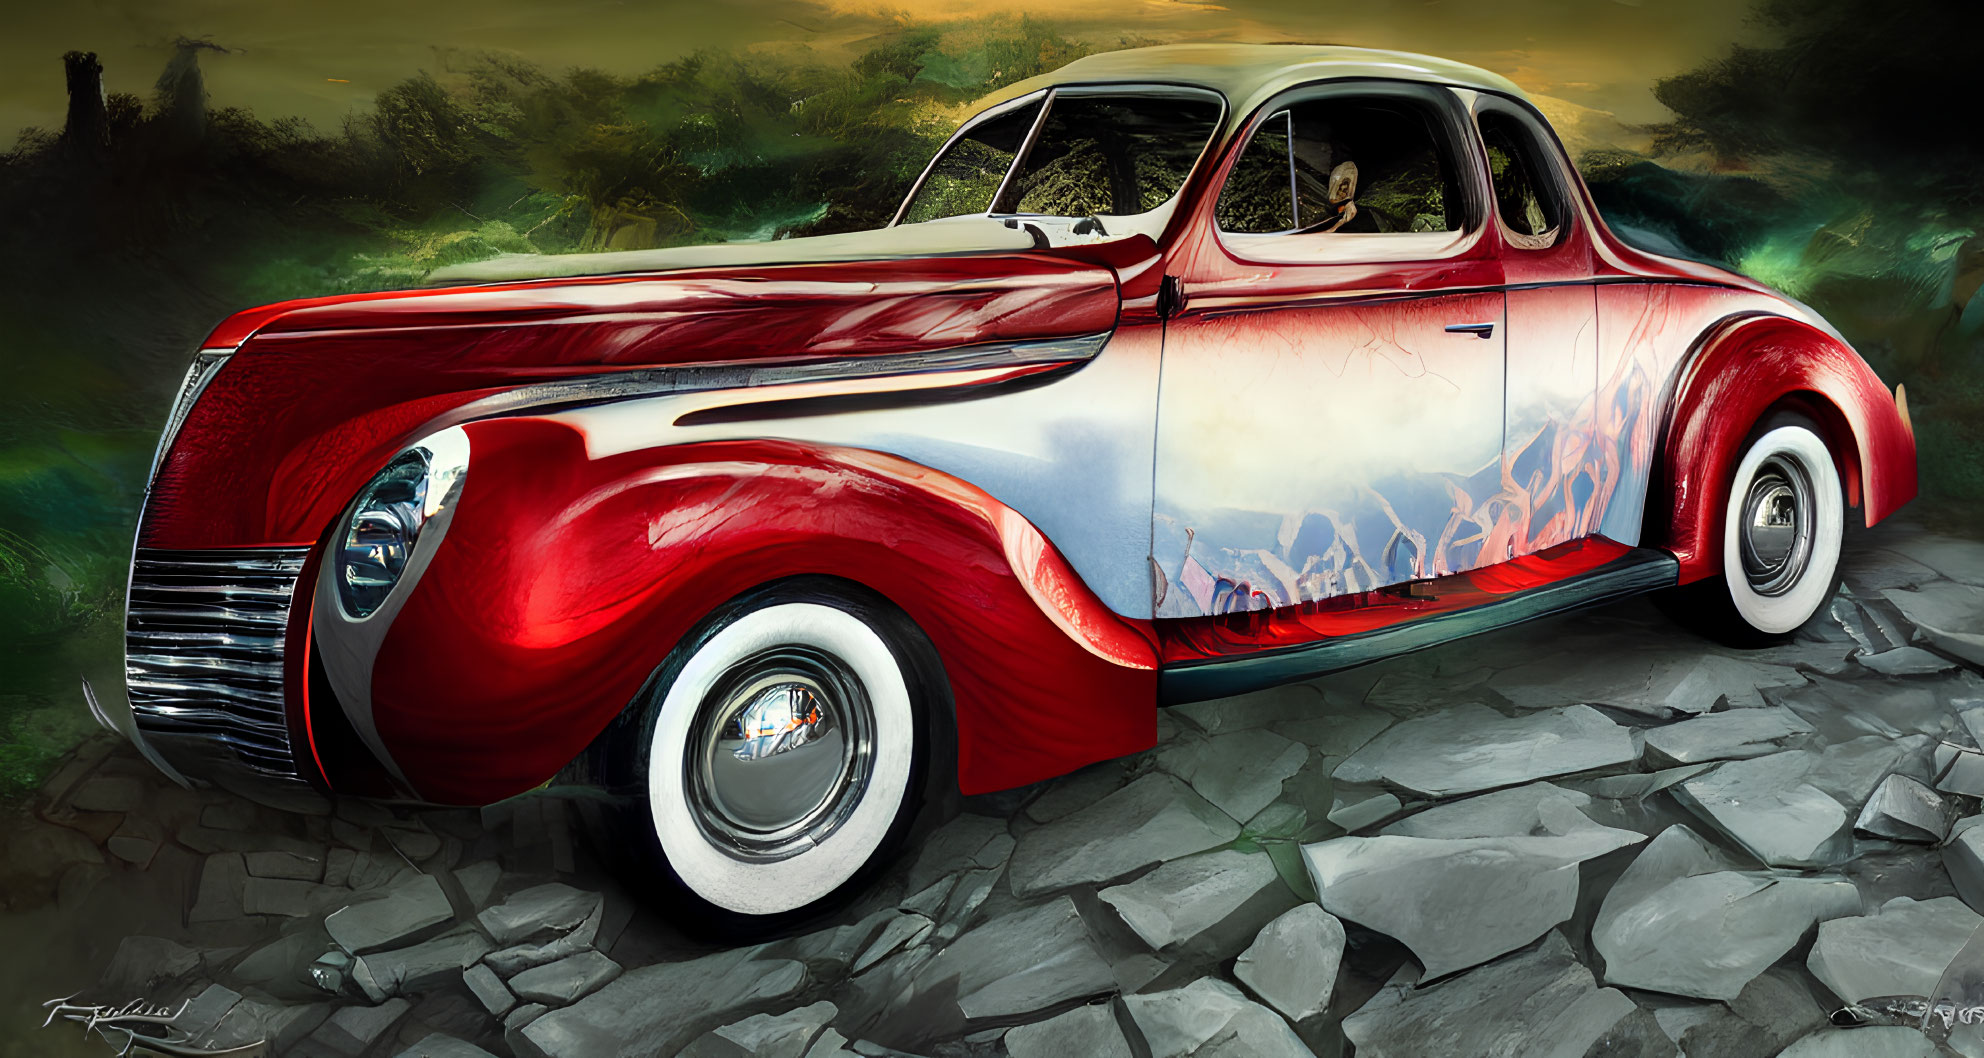 Classic Red and White Car with Custom Flame Detailing on Cobblestone Ground